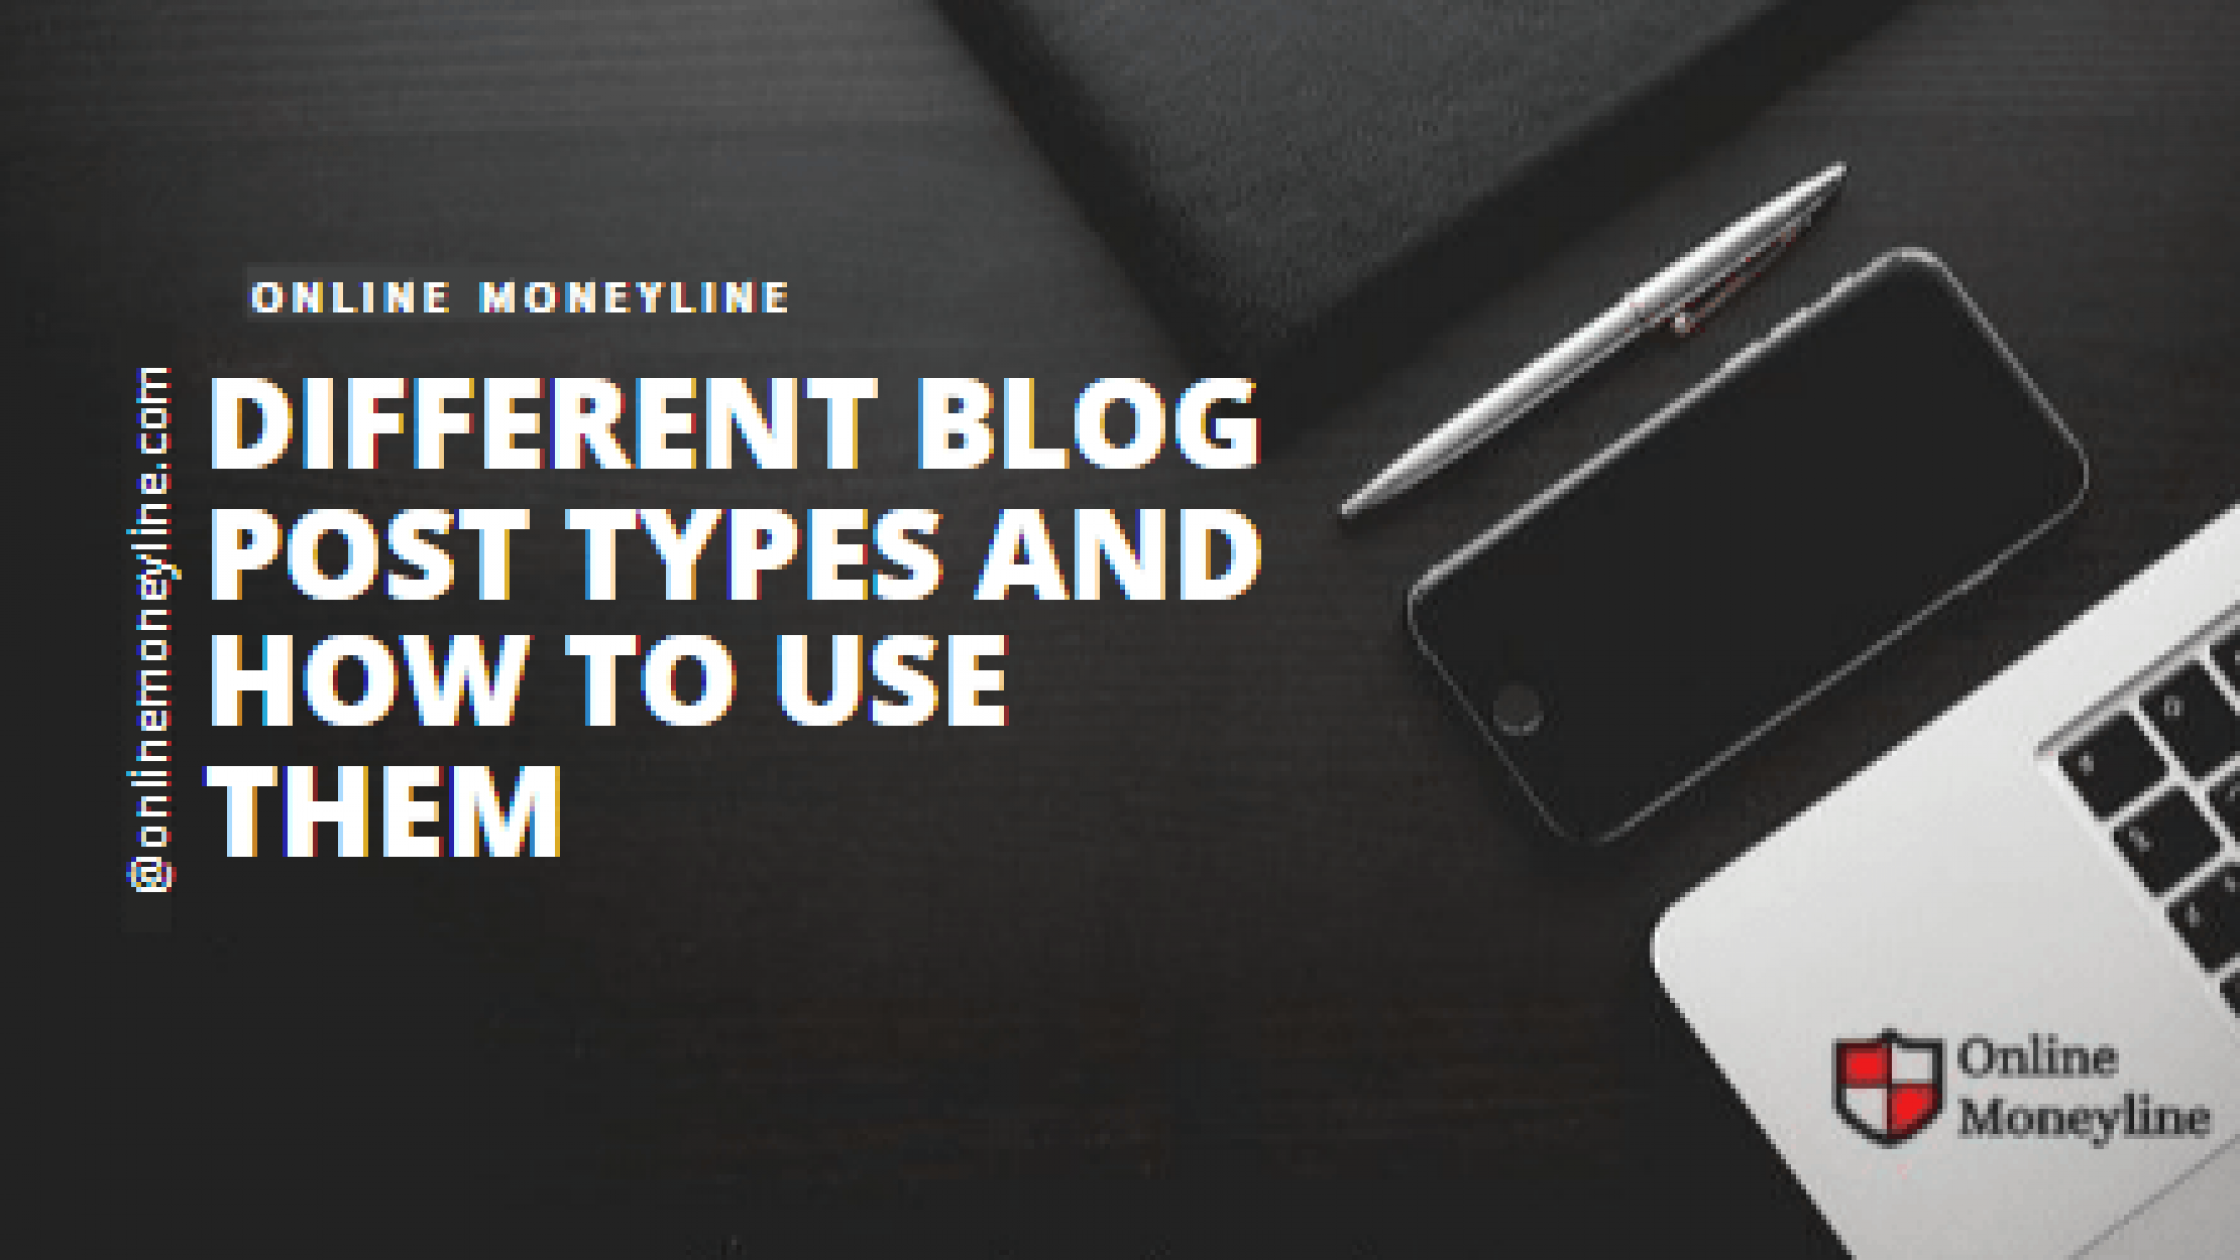 Different Blog Post Types And How To Use Them